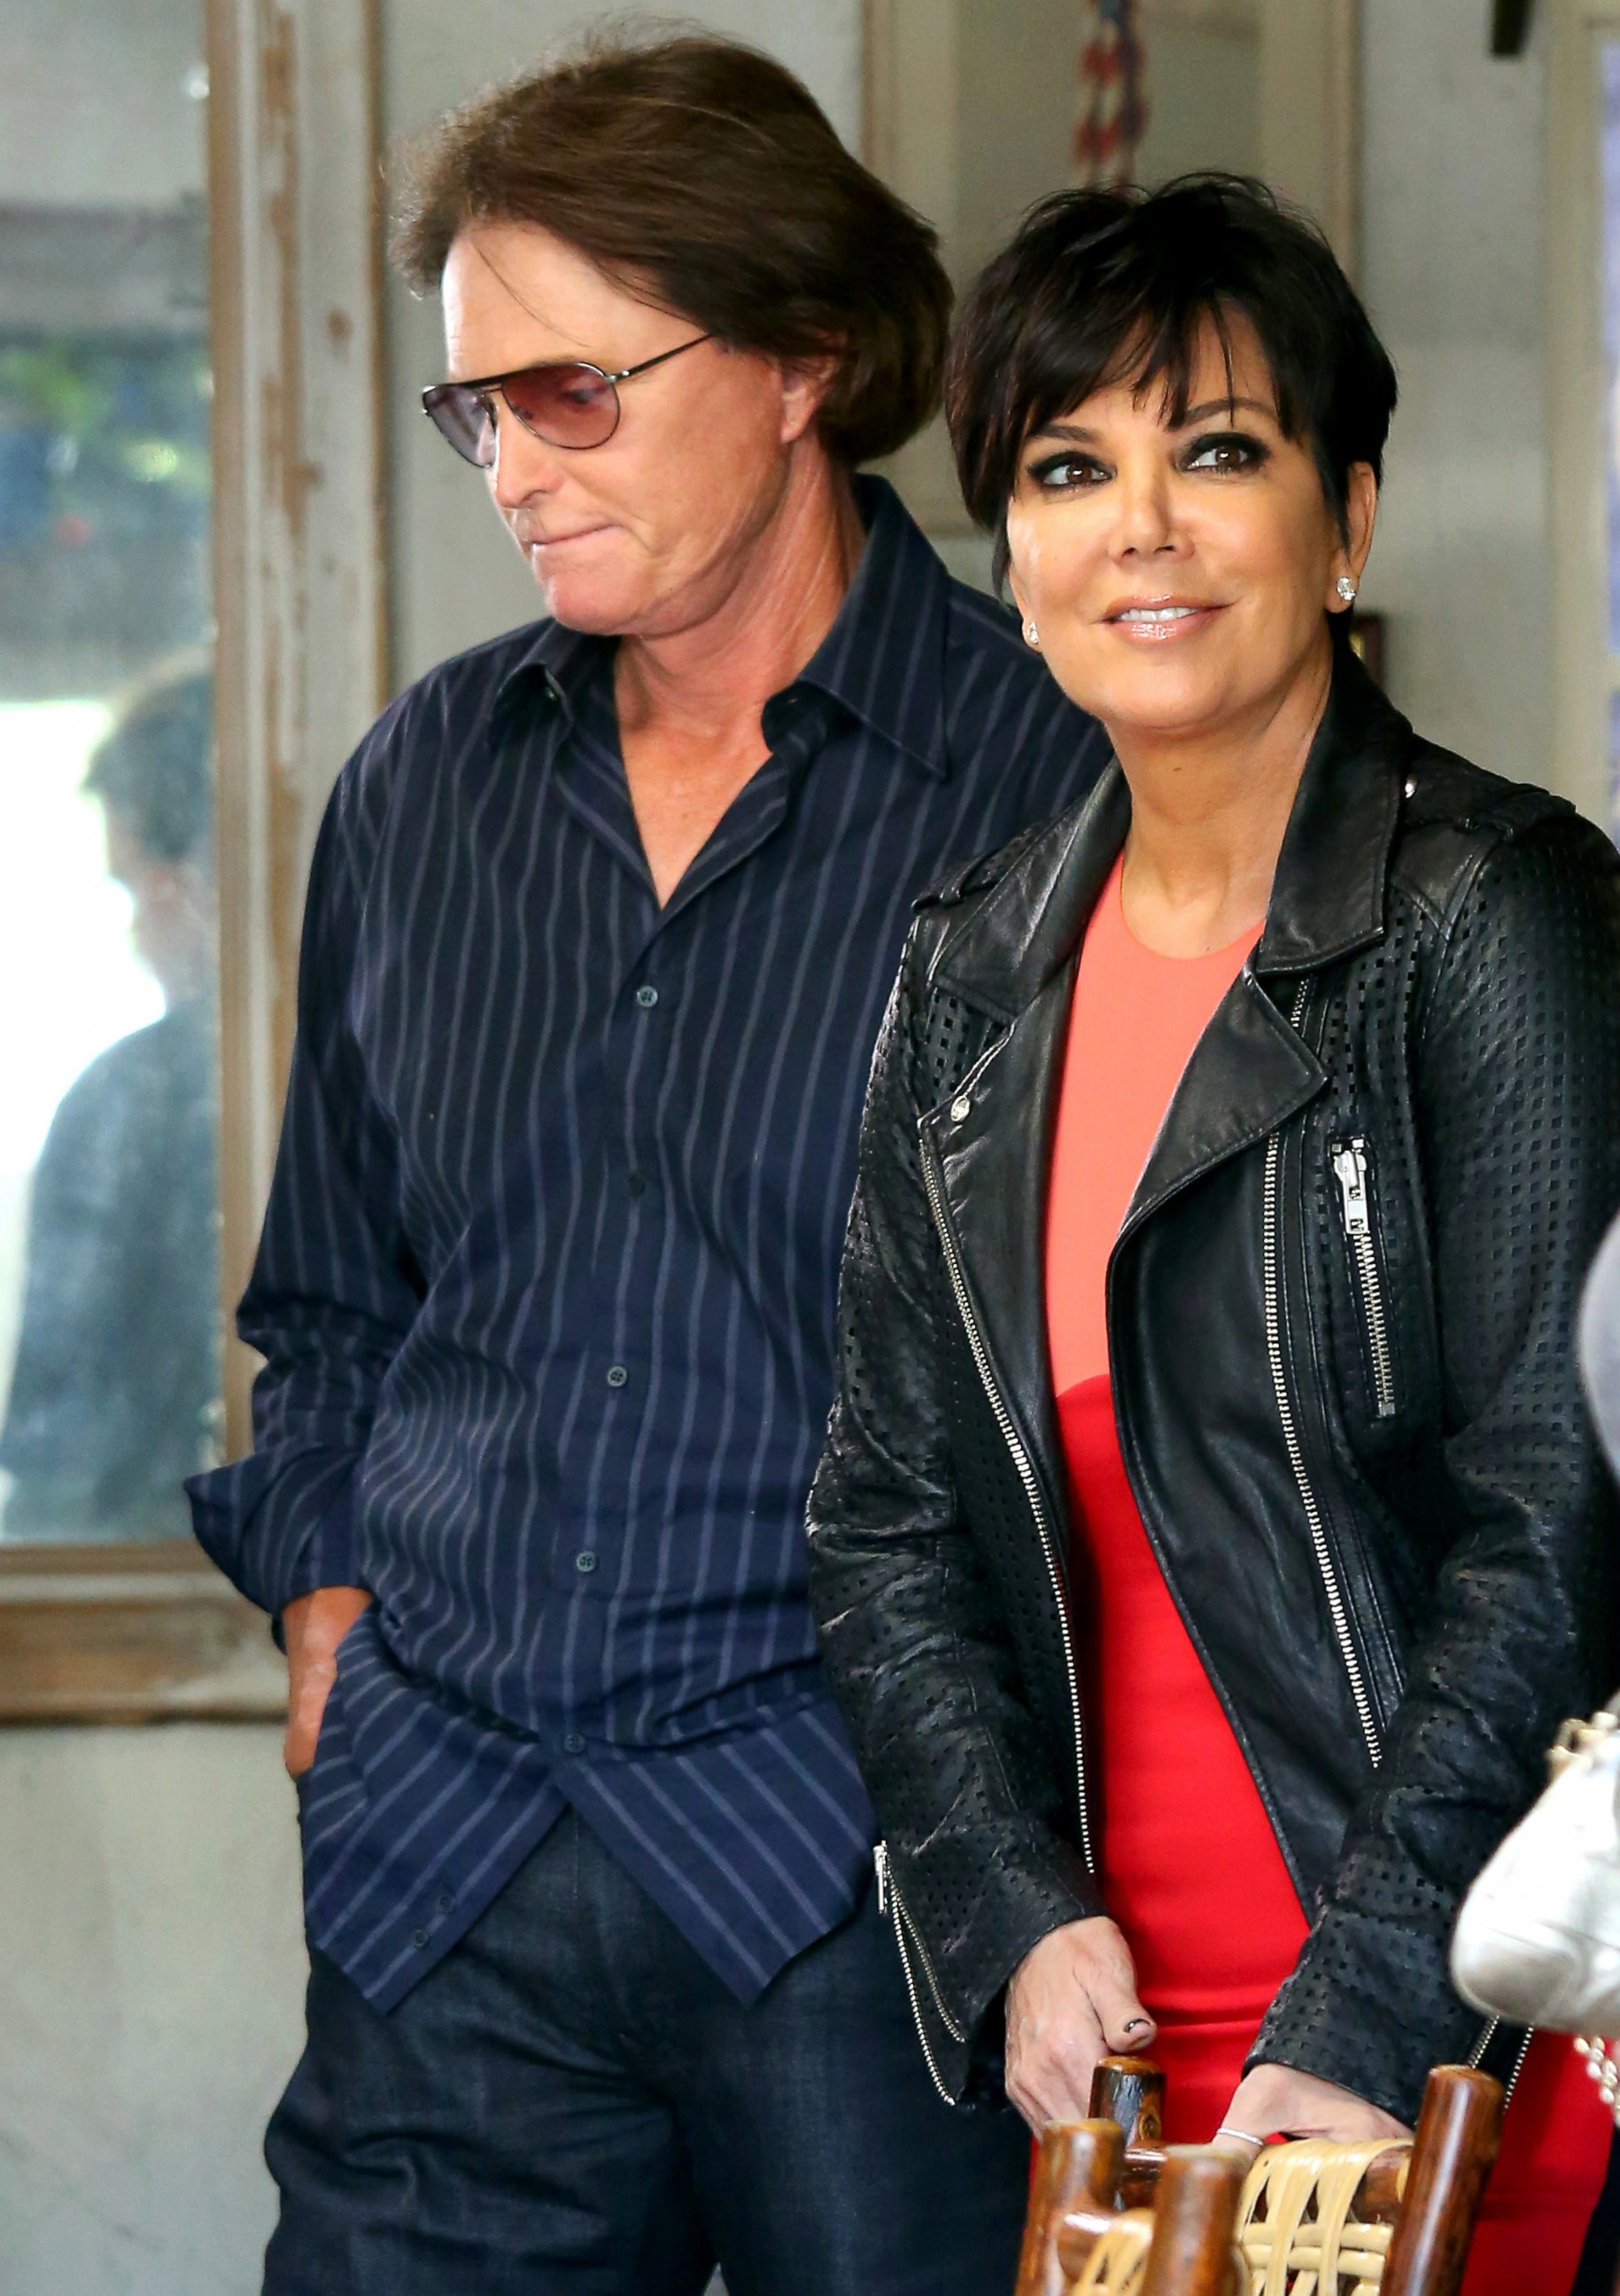 PHOTO: Bruce Jenner and Kris Jenner are seen on March 21, 2013 in Los Angeles.